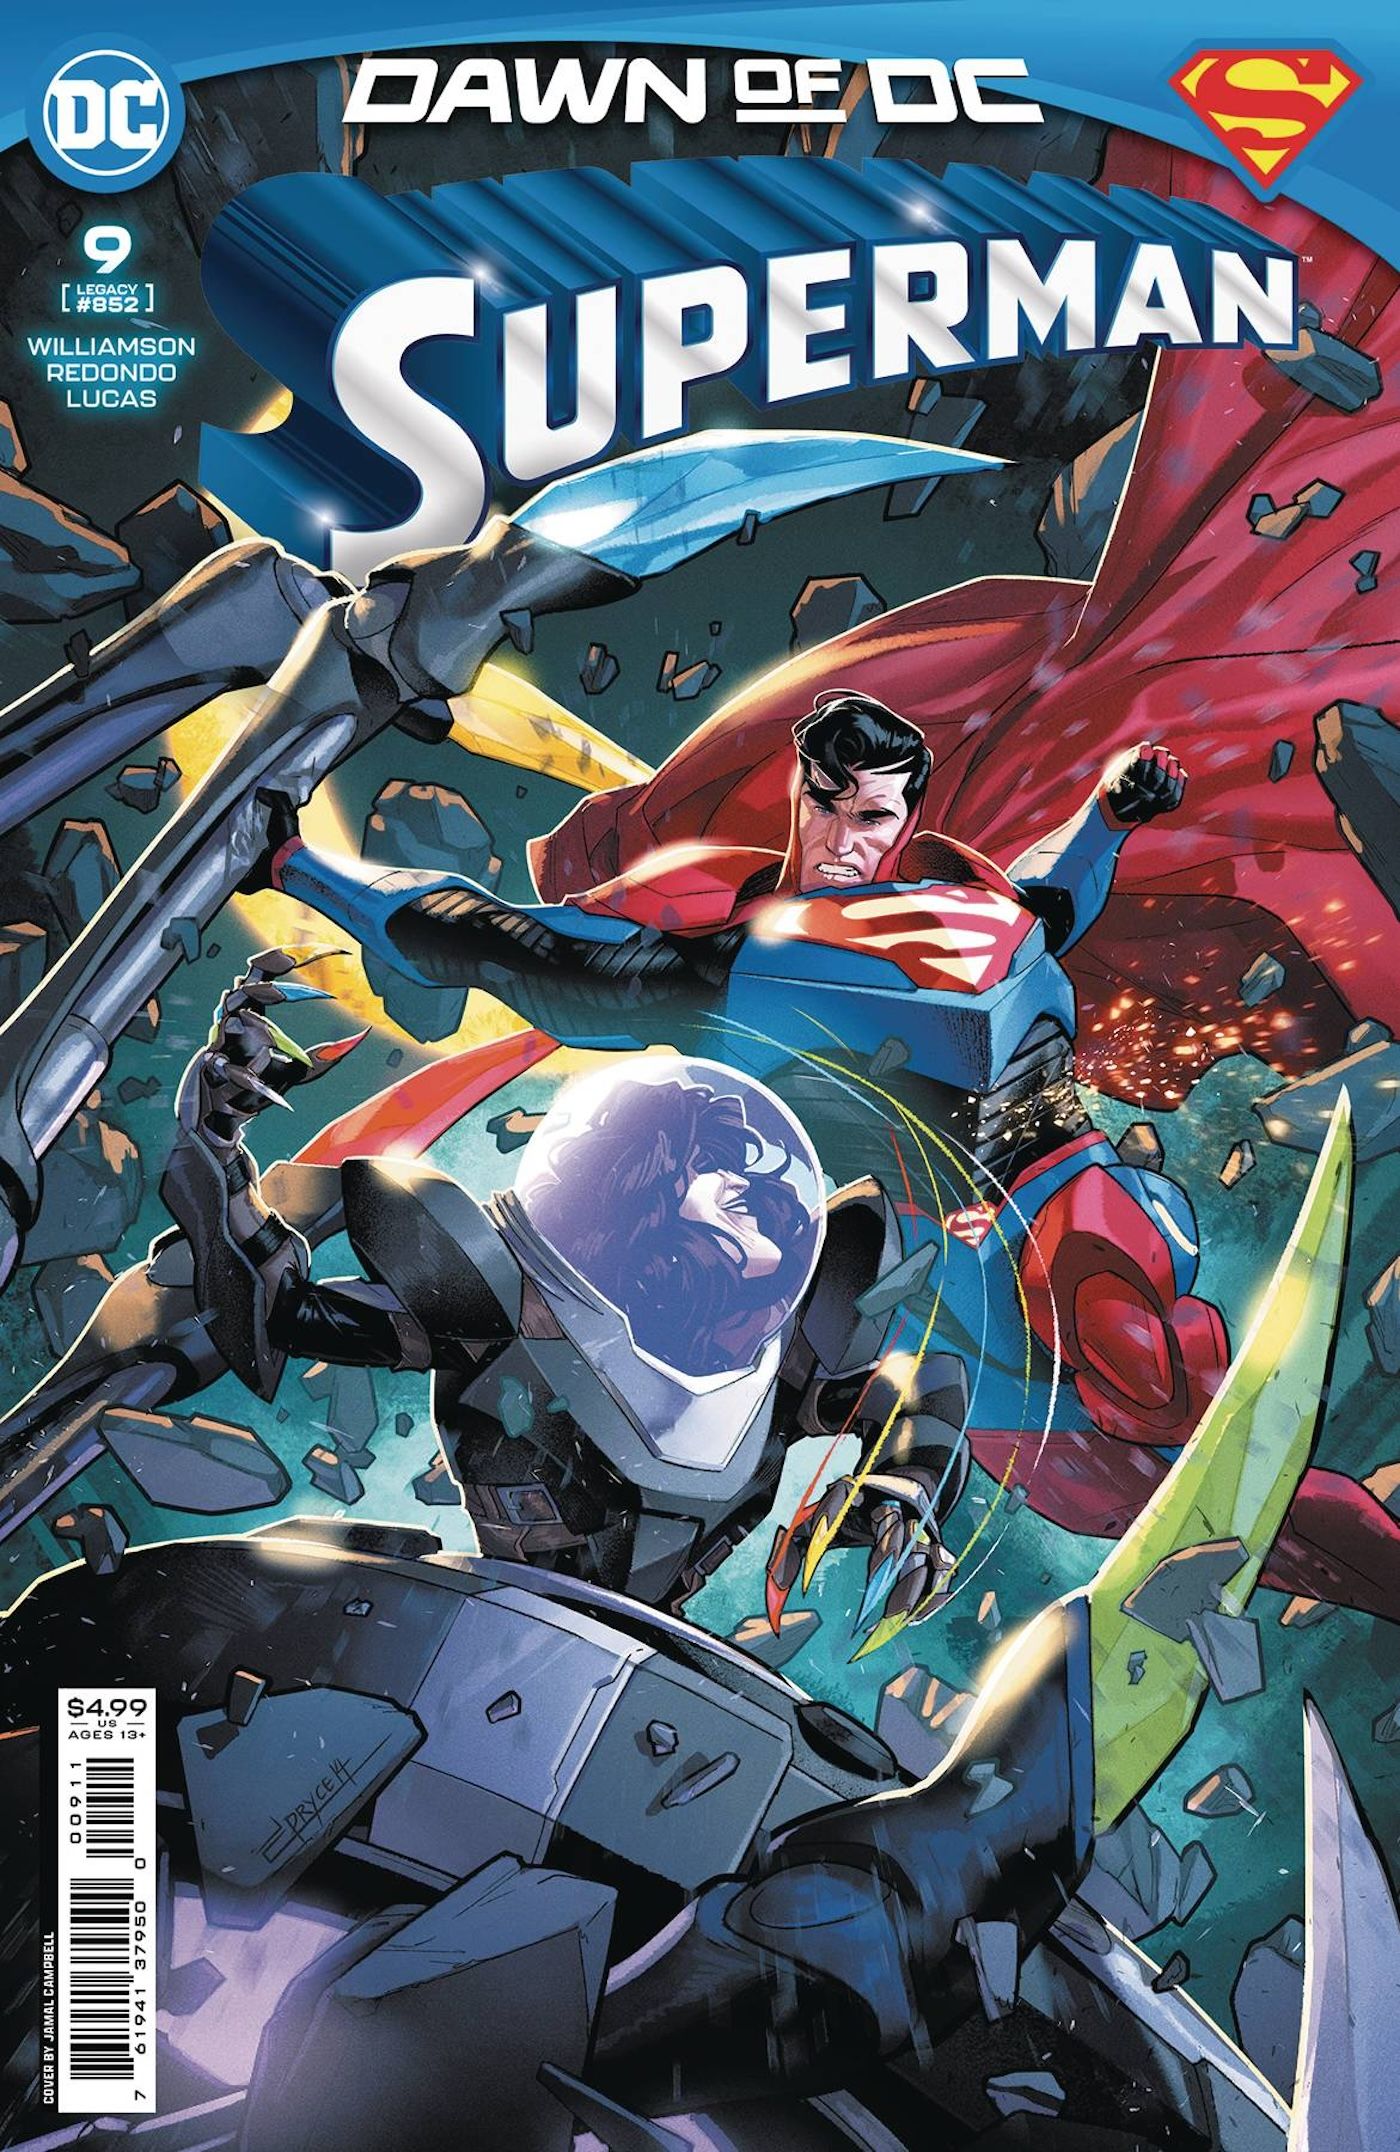 Superman 9 Main Cover: Superman battling a villain in armored suits.